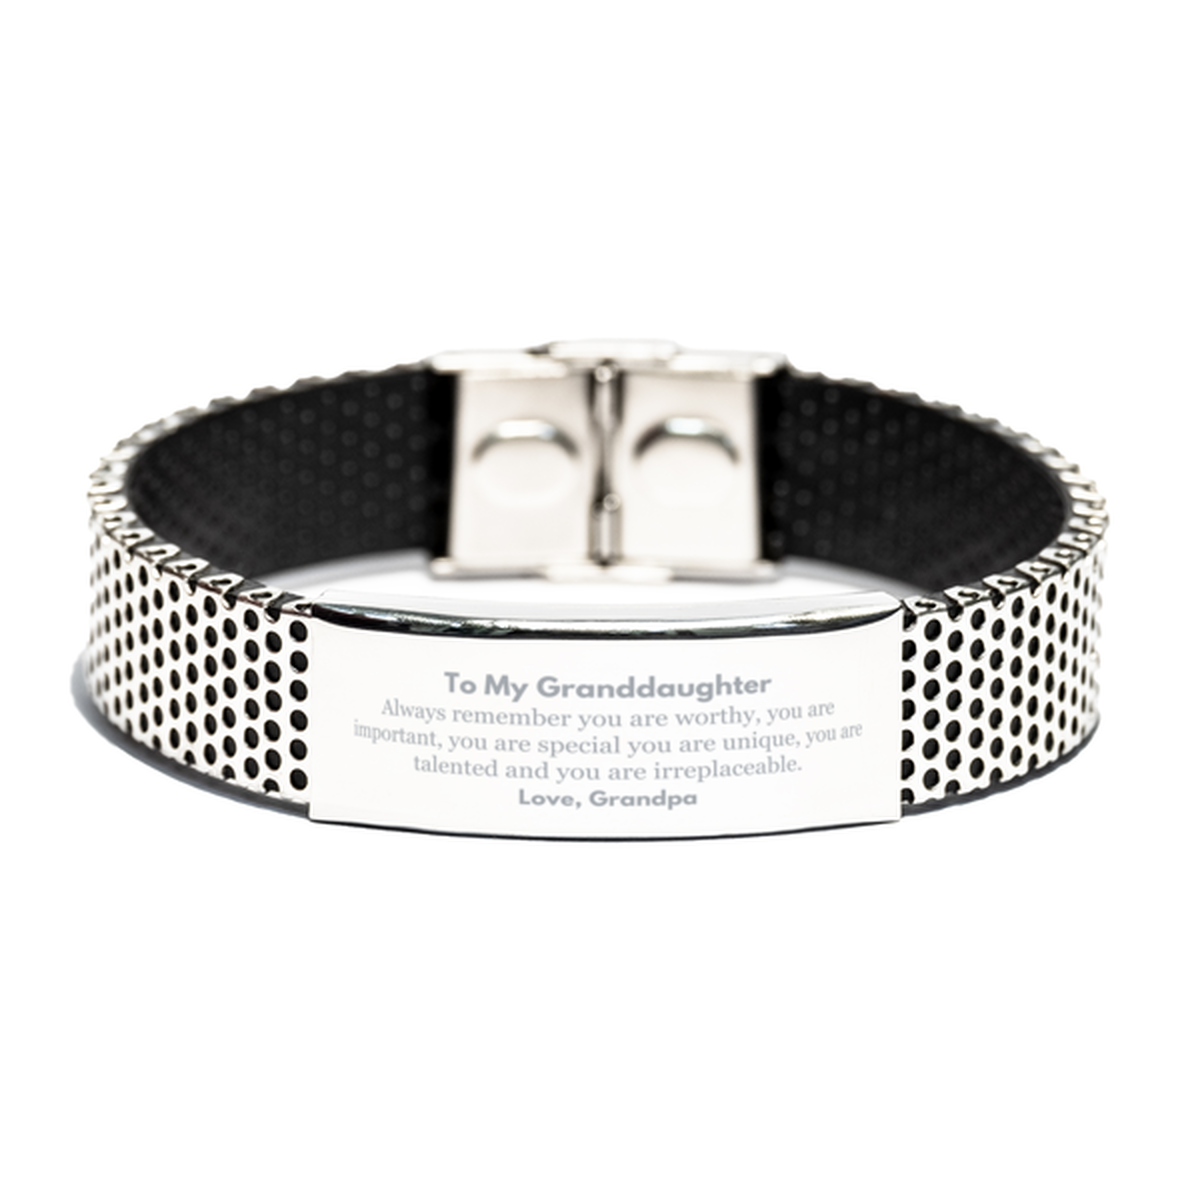 Granddaughter Birthday Gifts from Grandpa, Inspirational Stainless Steel Bracelet for Granddaughter Christmas Graduation Gifts for Granddaughter Always remember you are worthy, you are important. Love, Grandpa